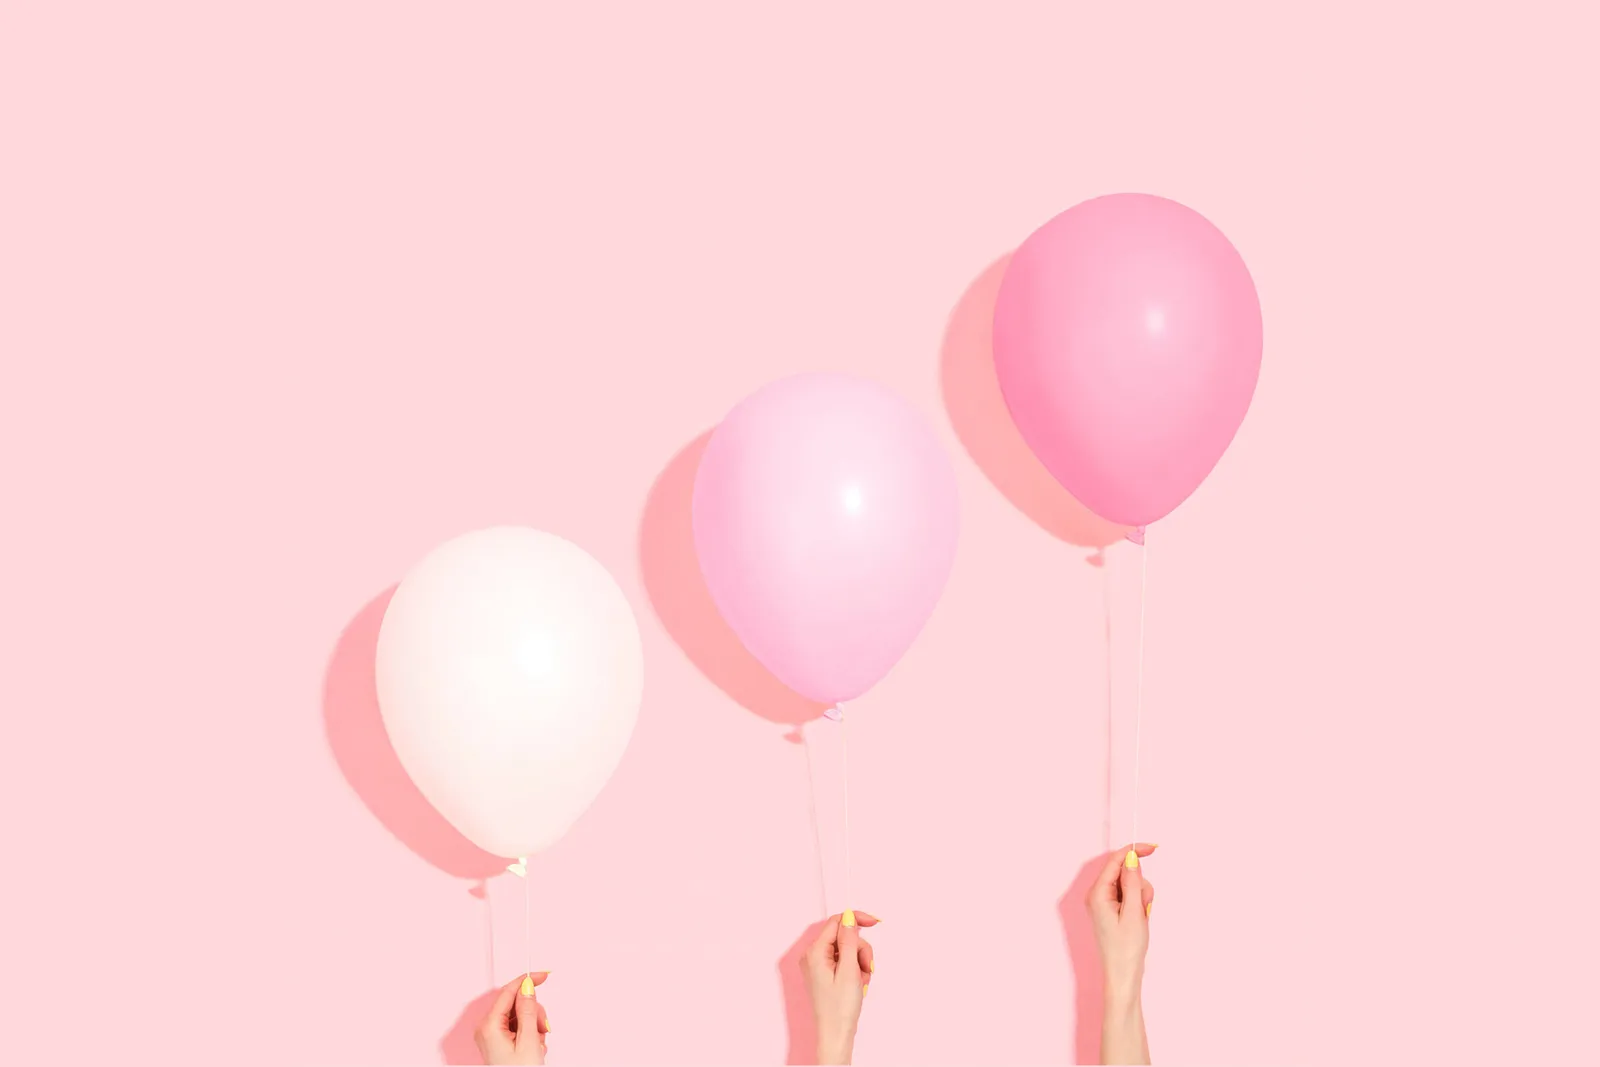 three balloons on a pink background with shades of pink